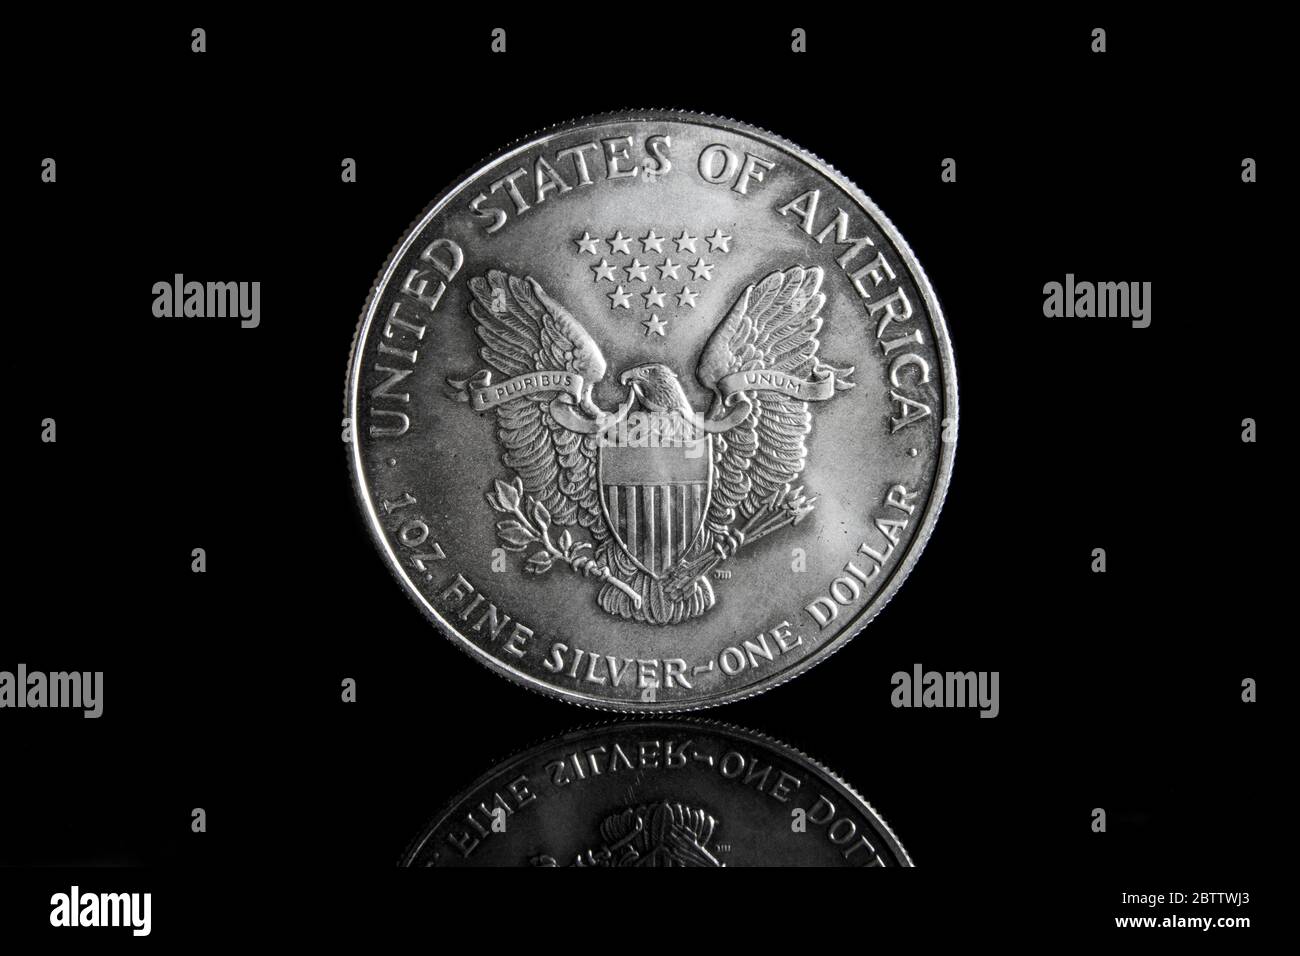 Front of an American Silver Eagle 1 Ounce Fine Silver Bullion Coin against a back background with reflection. Stock Photo